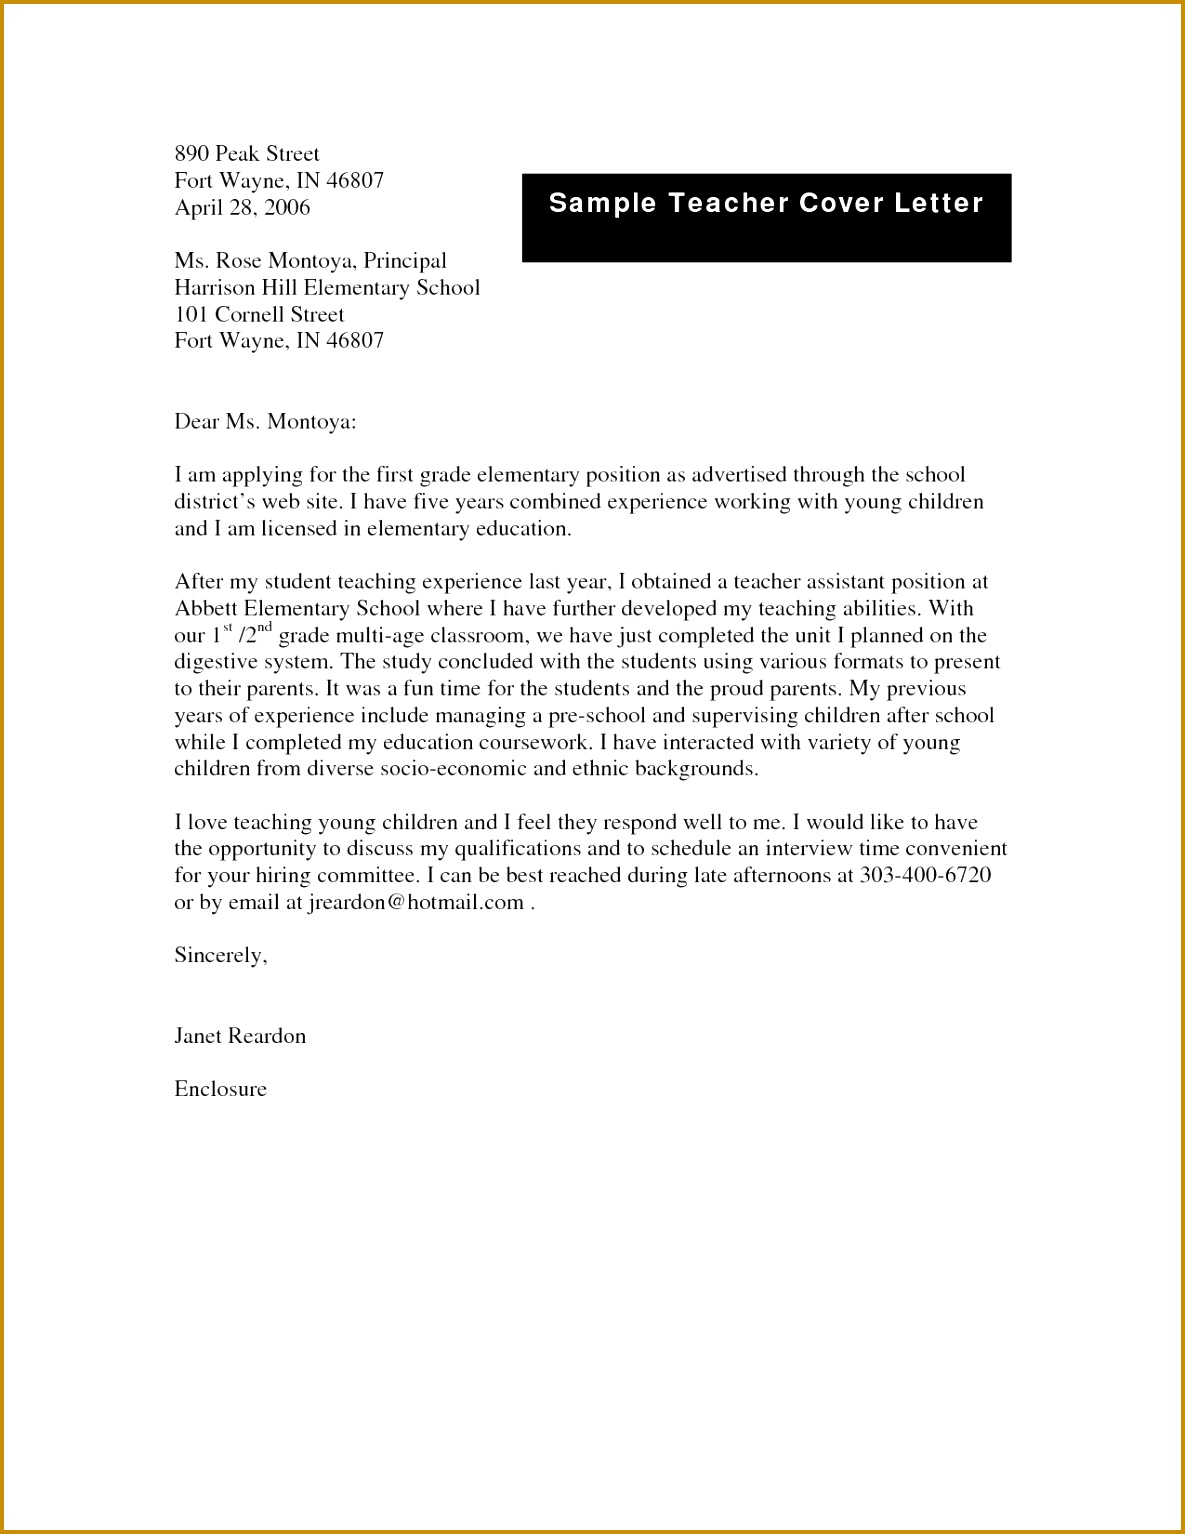 Letter format asking for Transfer Copy Sample Teacher S Letter Request for Transfer to Another School 15341185